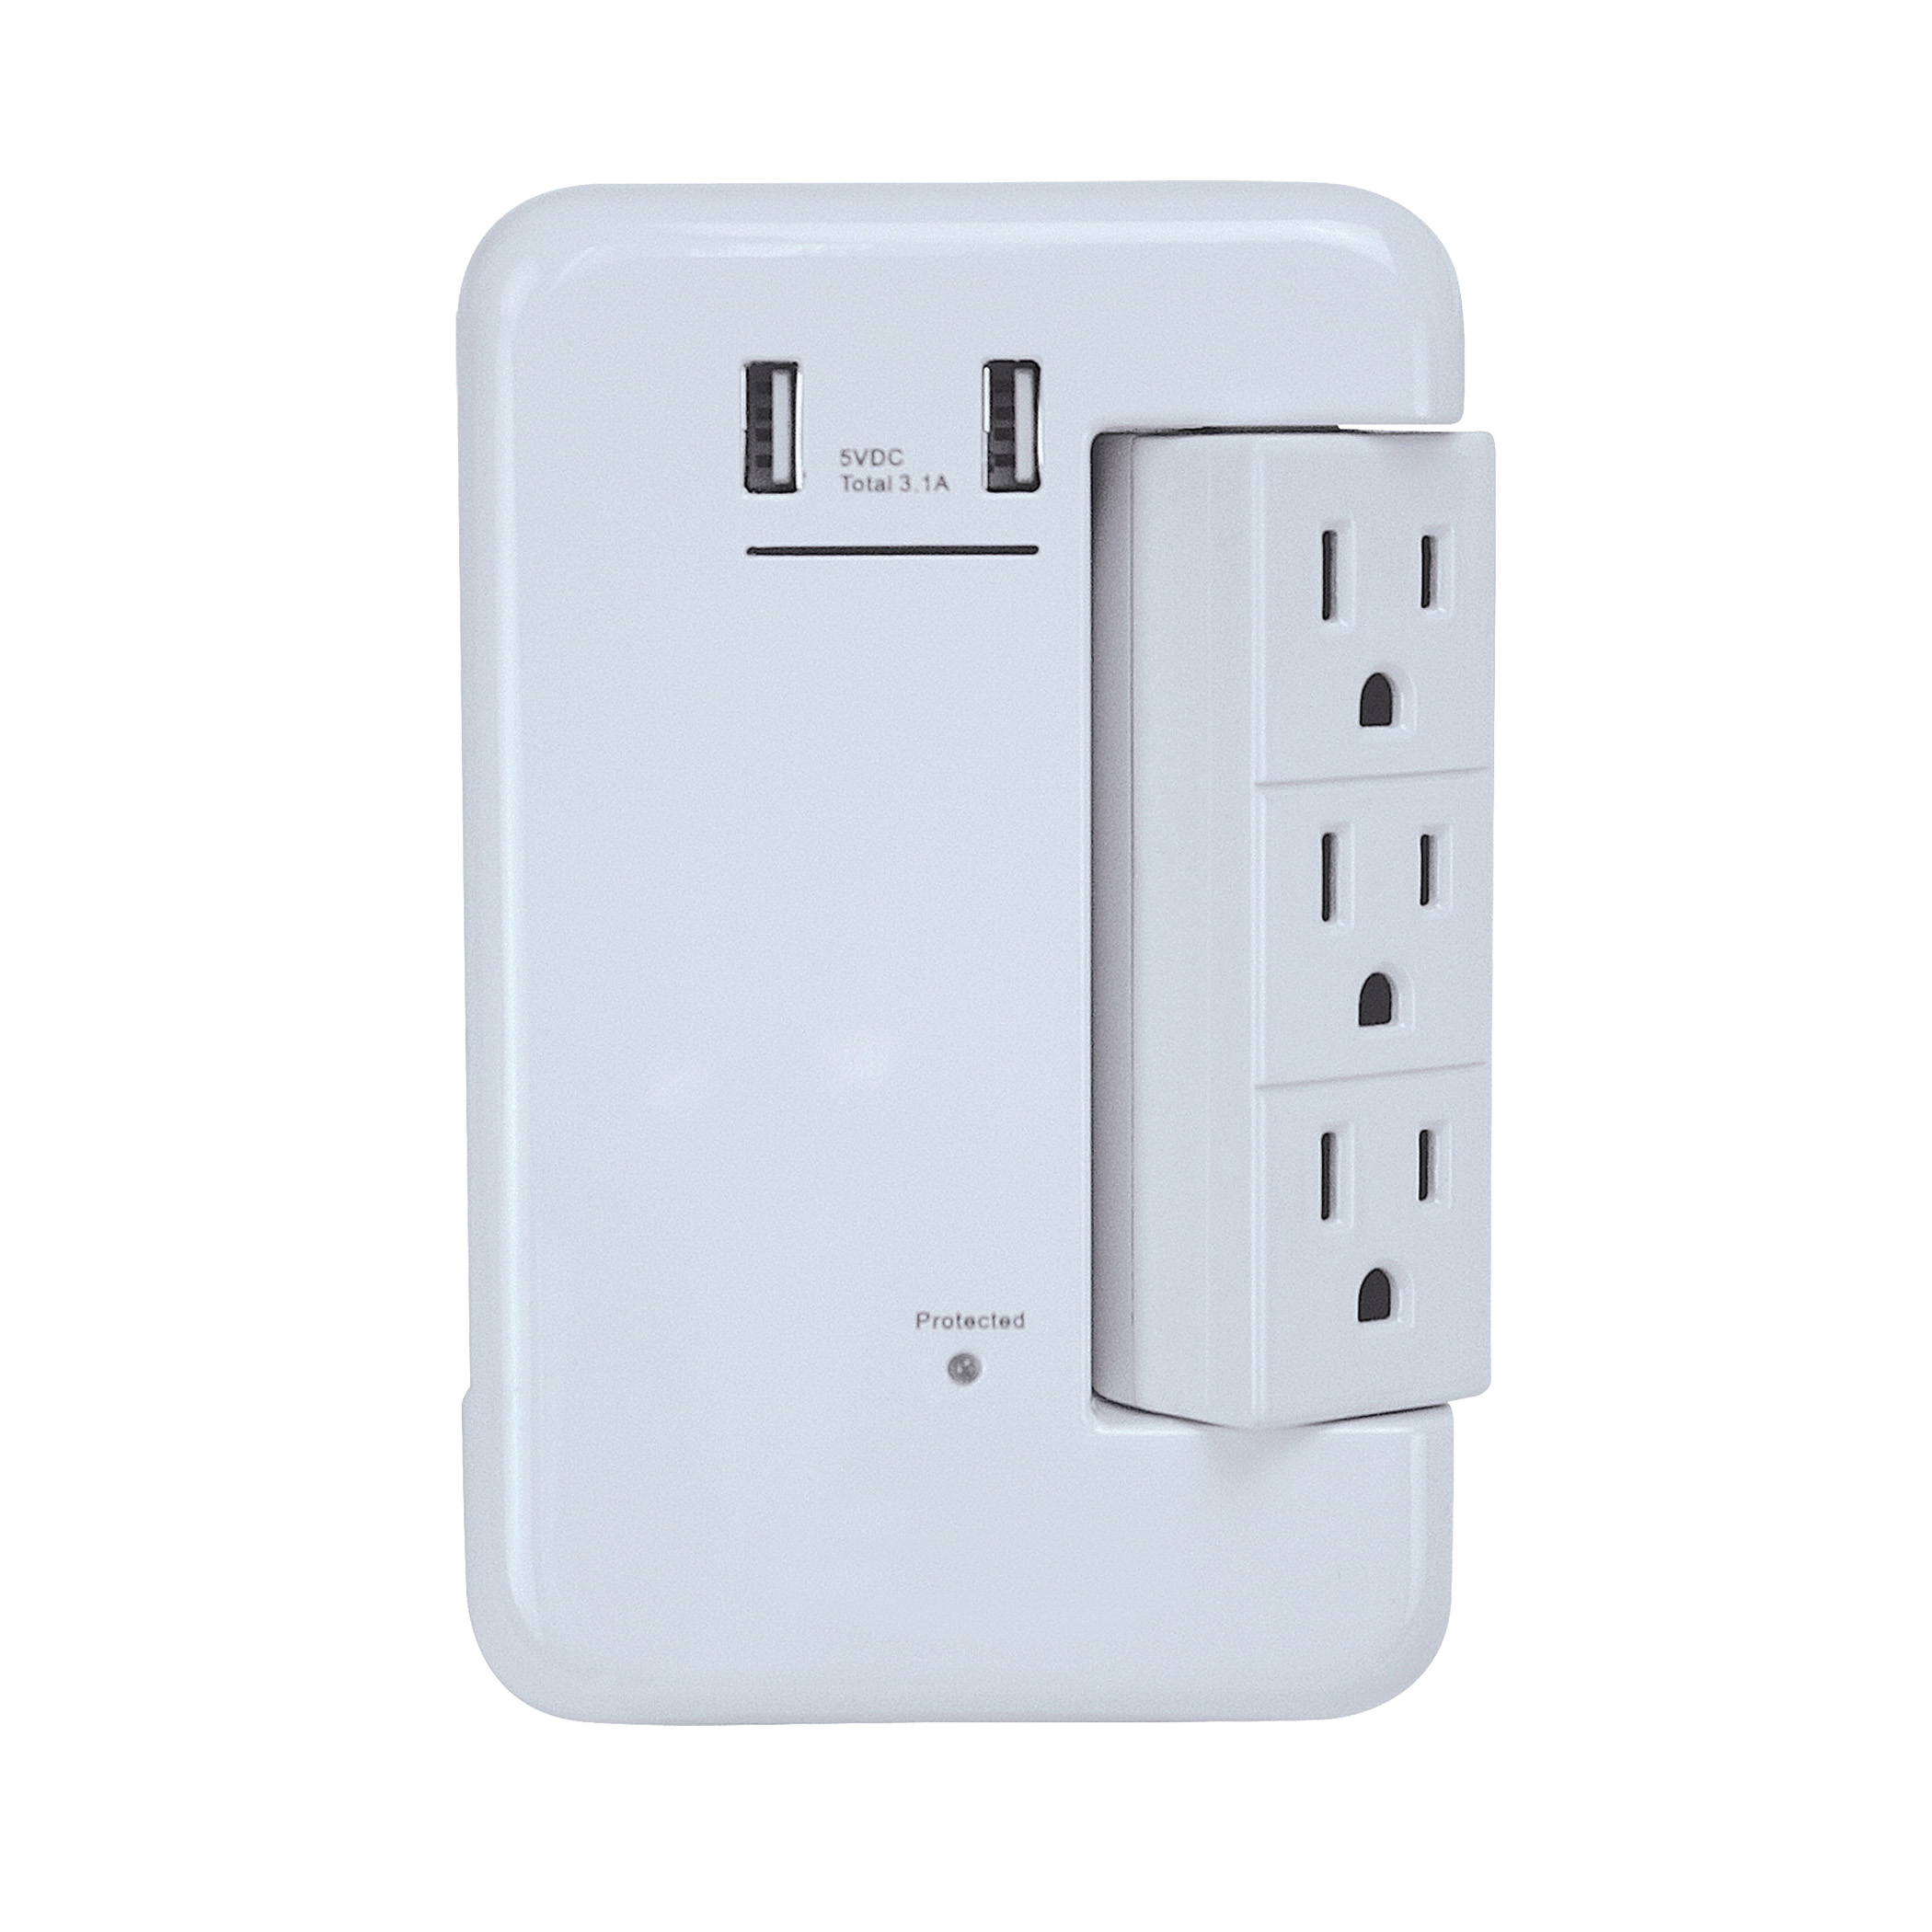 ORRUSB346S USB Charger with Surge Protection, 2 -Pole, 3.4 A, White